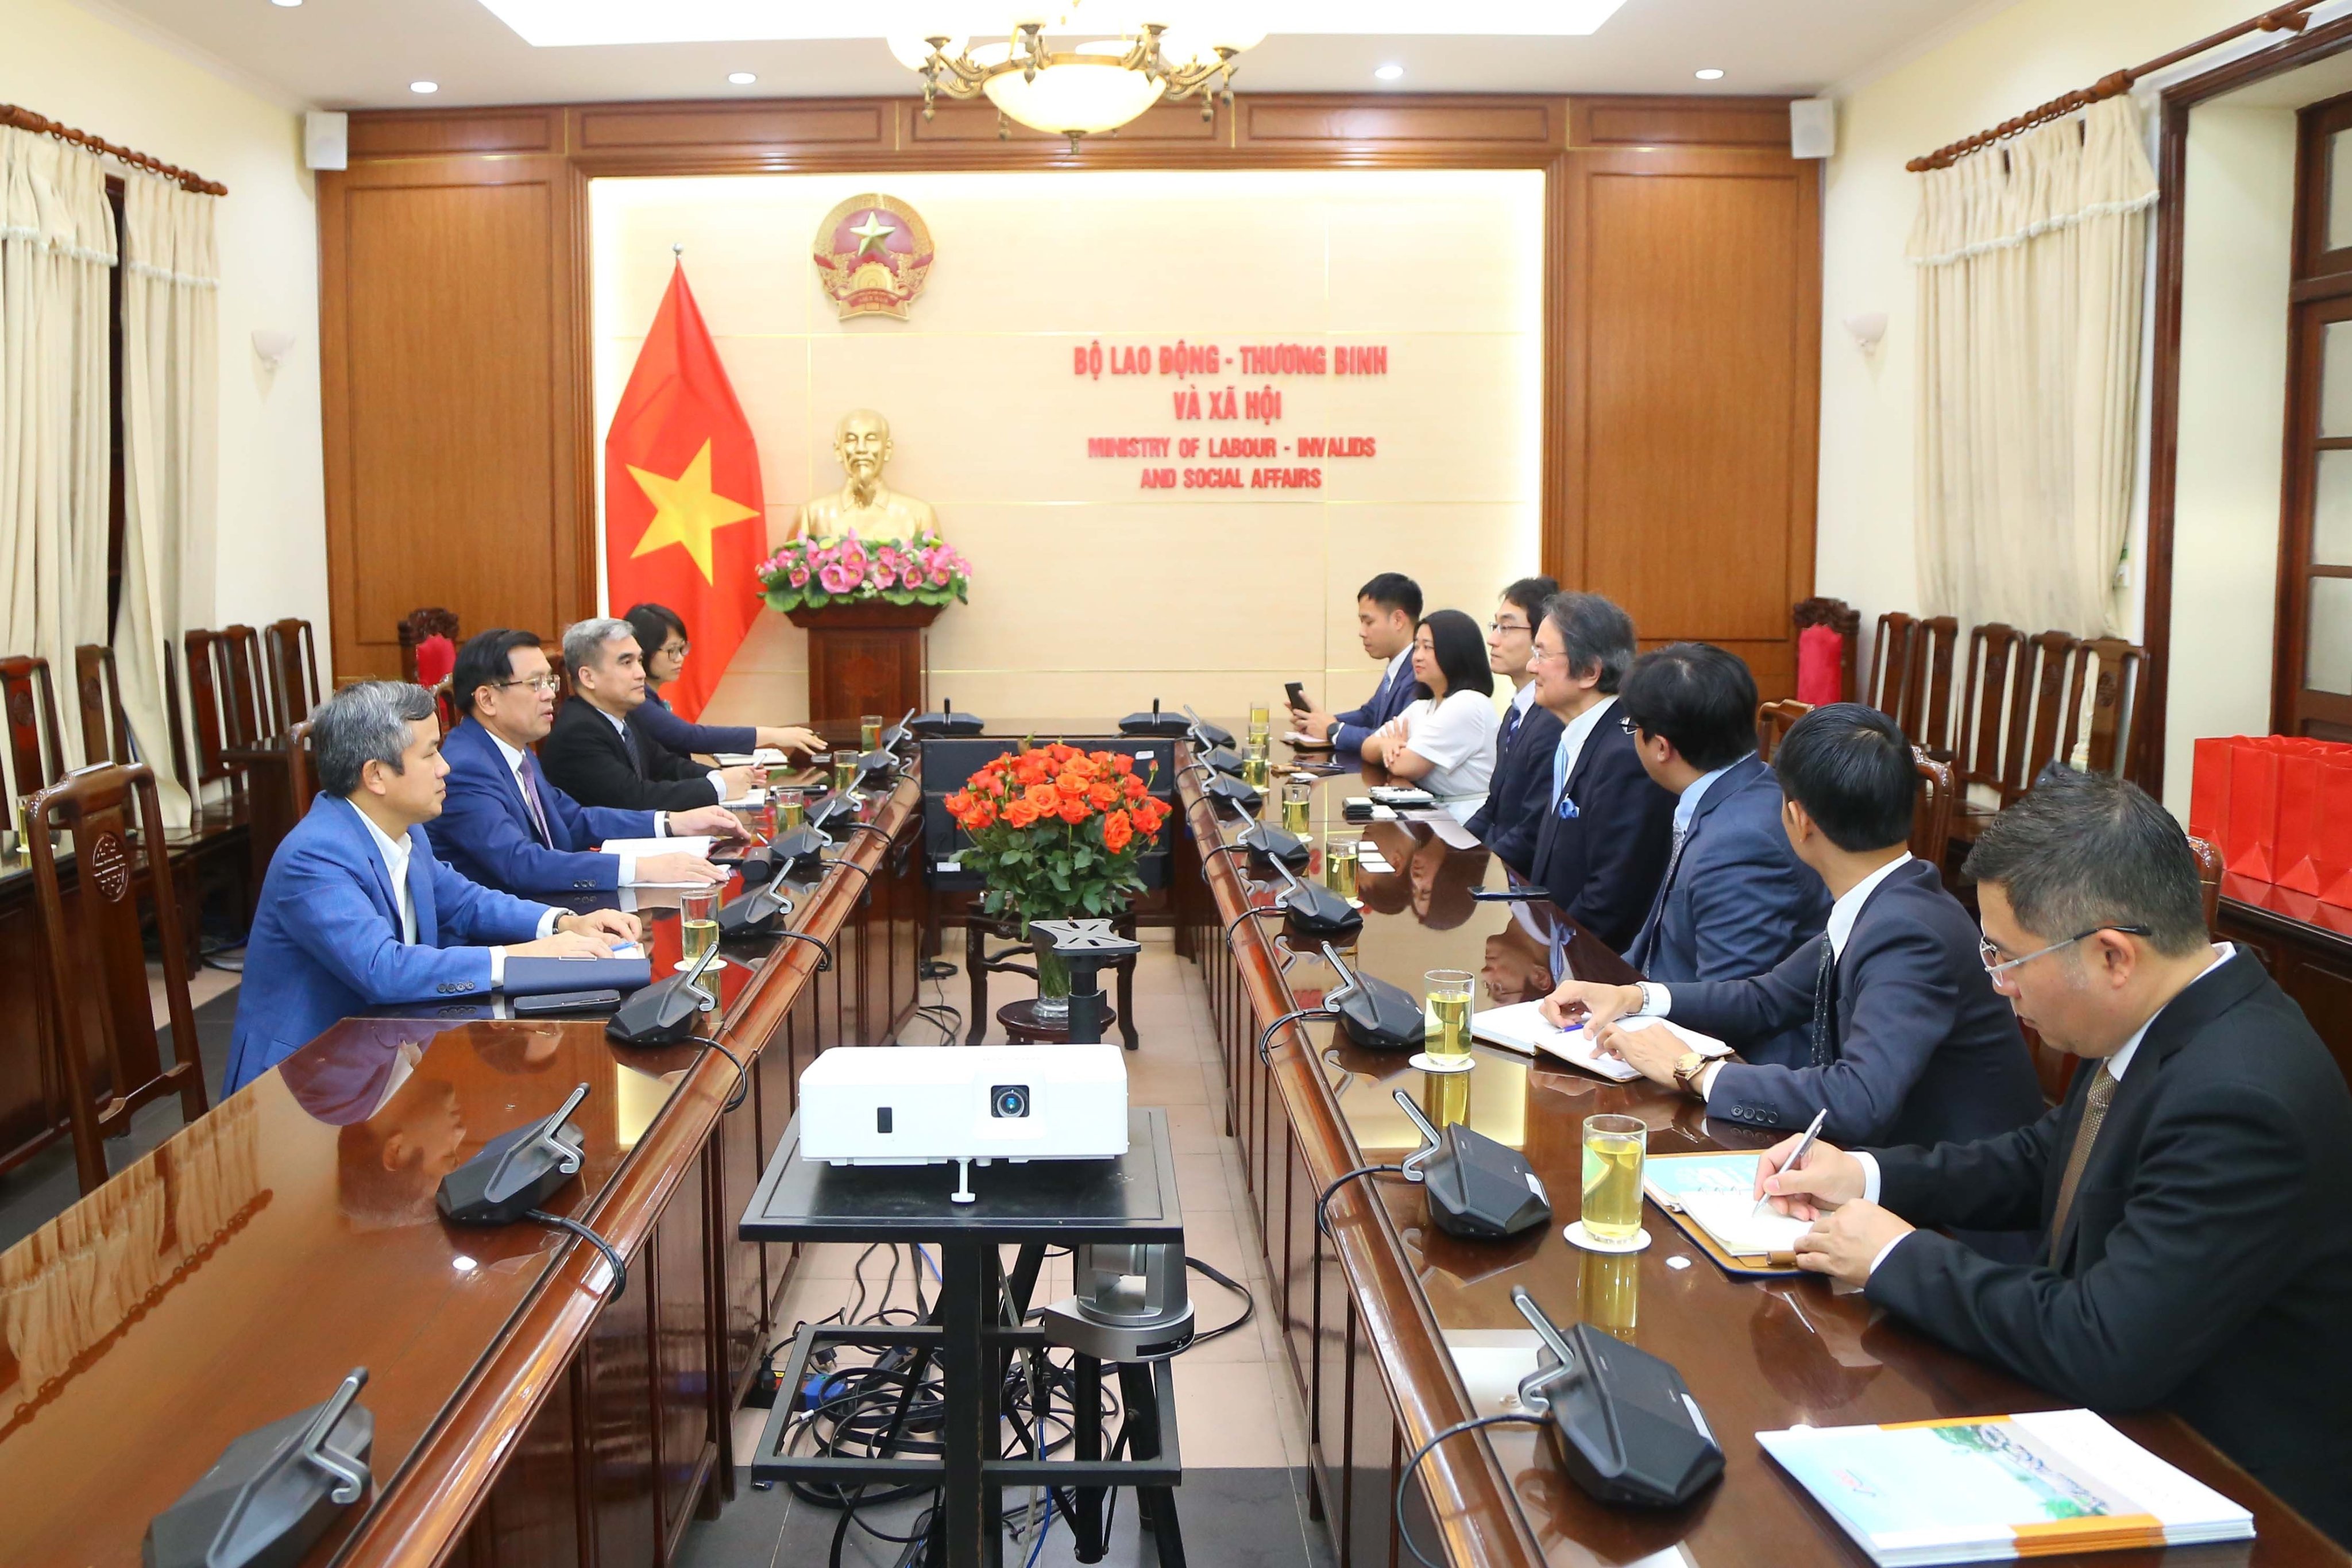 Deputy Minister Nguyen Ba Hoan receives President of Knowledge Group